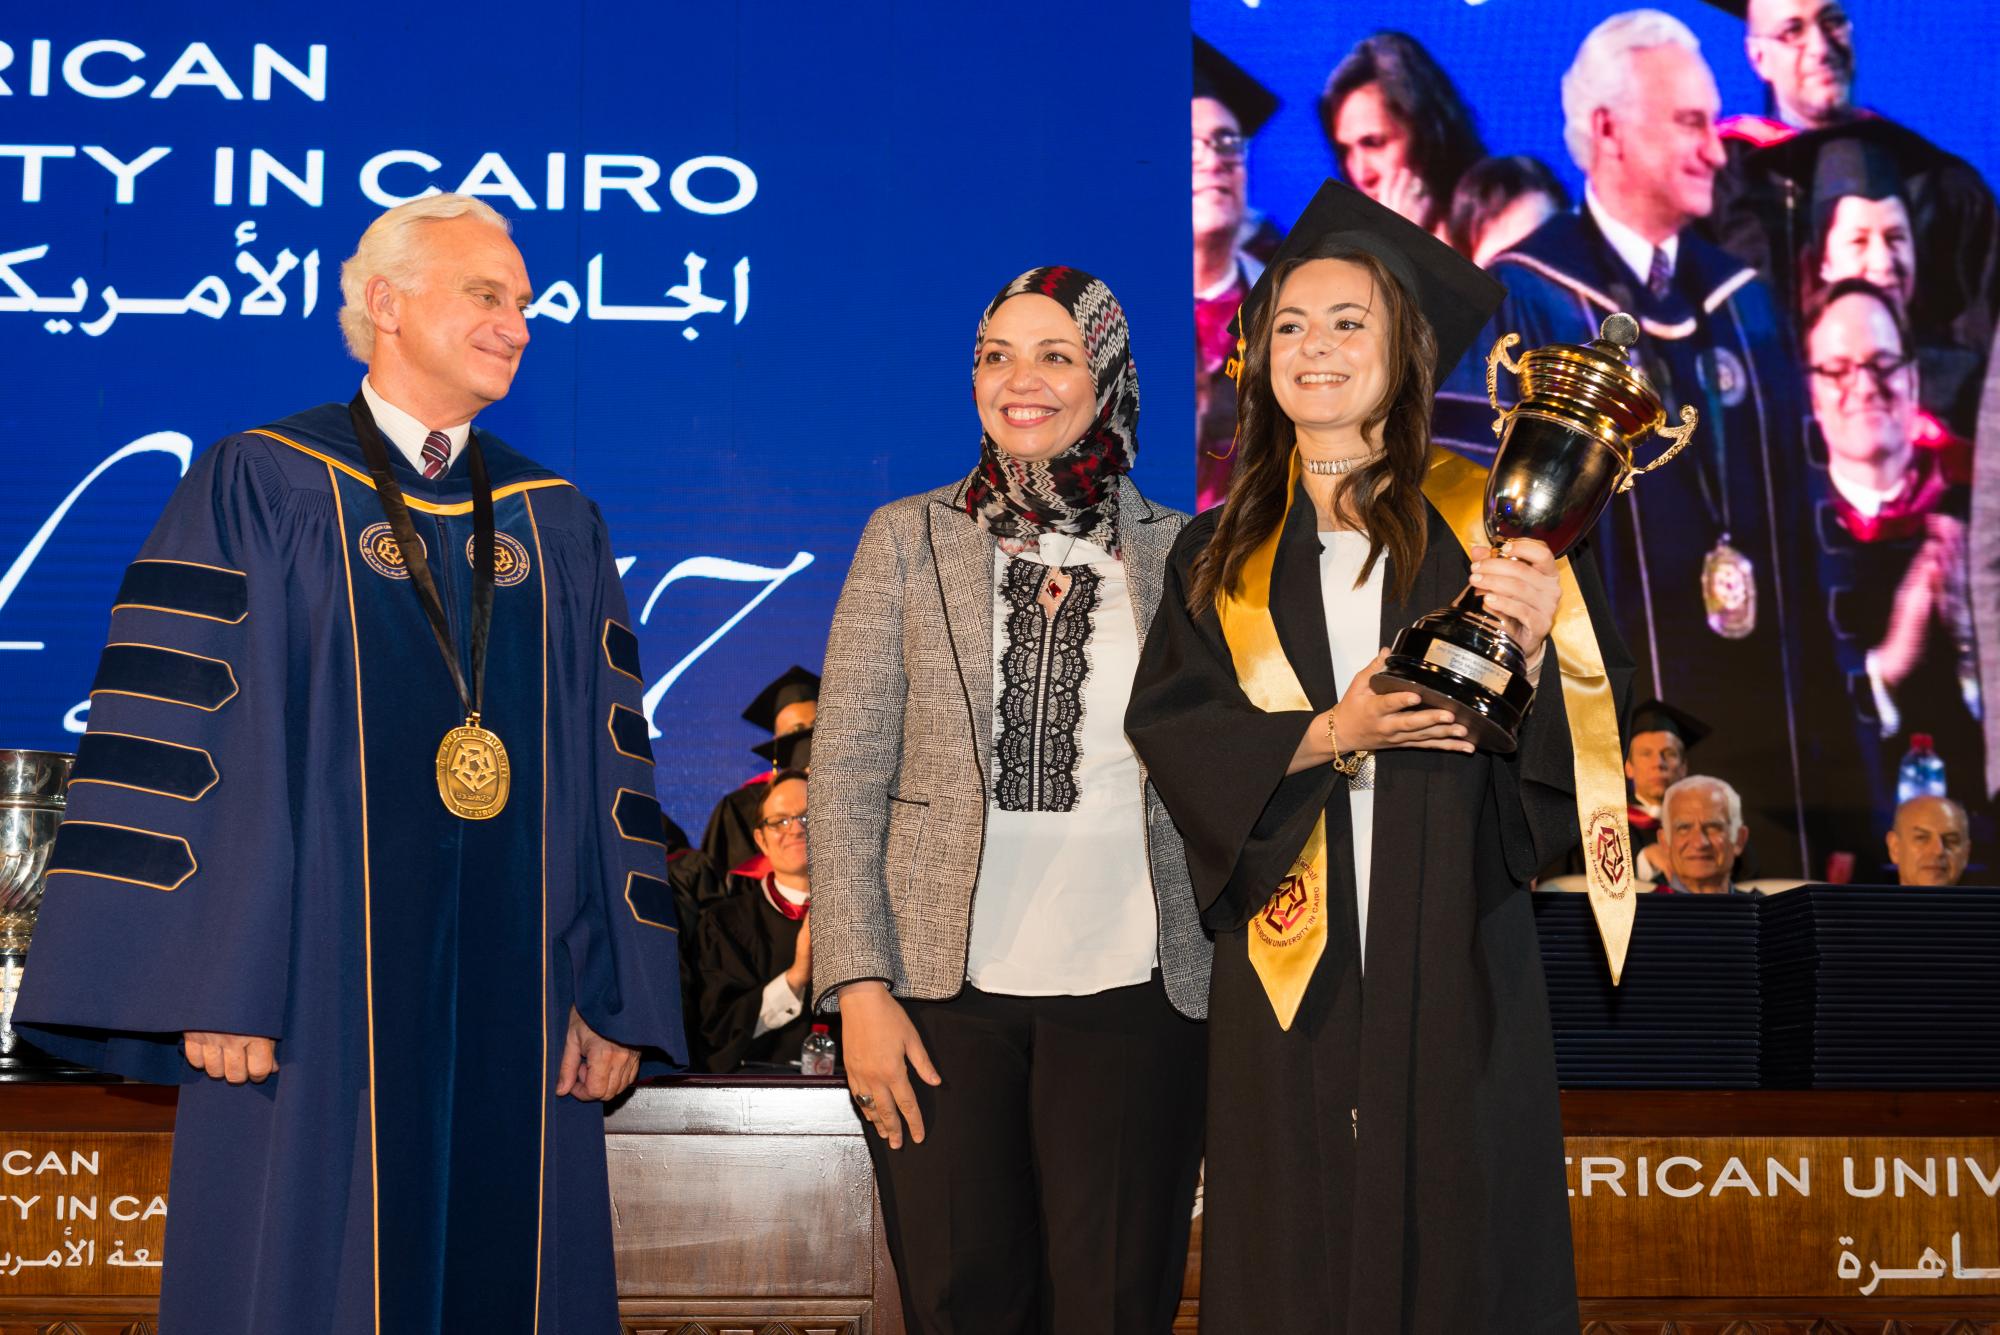 Dina Meshref was awarded the Omar Mohsen Athletic Achievement Cup at this year's undergraduate commencement ceremony for her impressive athletic achievements as a student